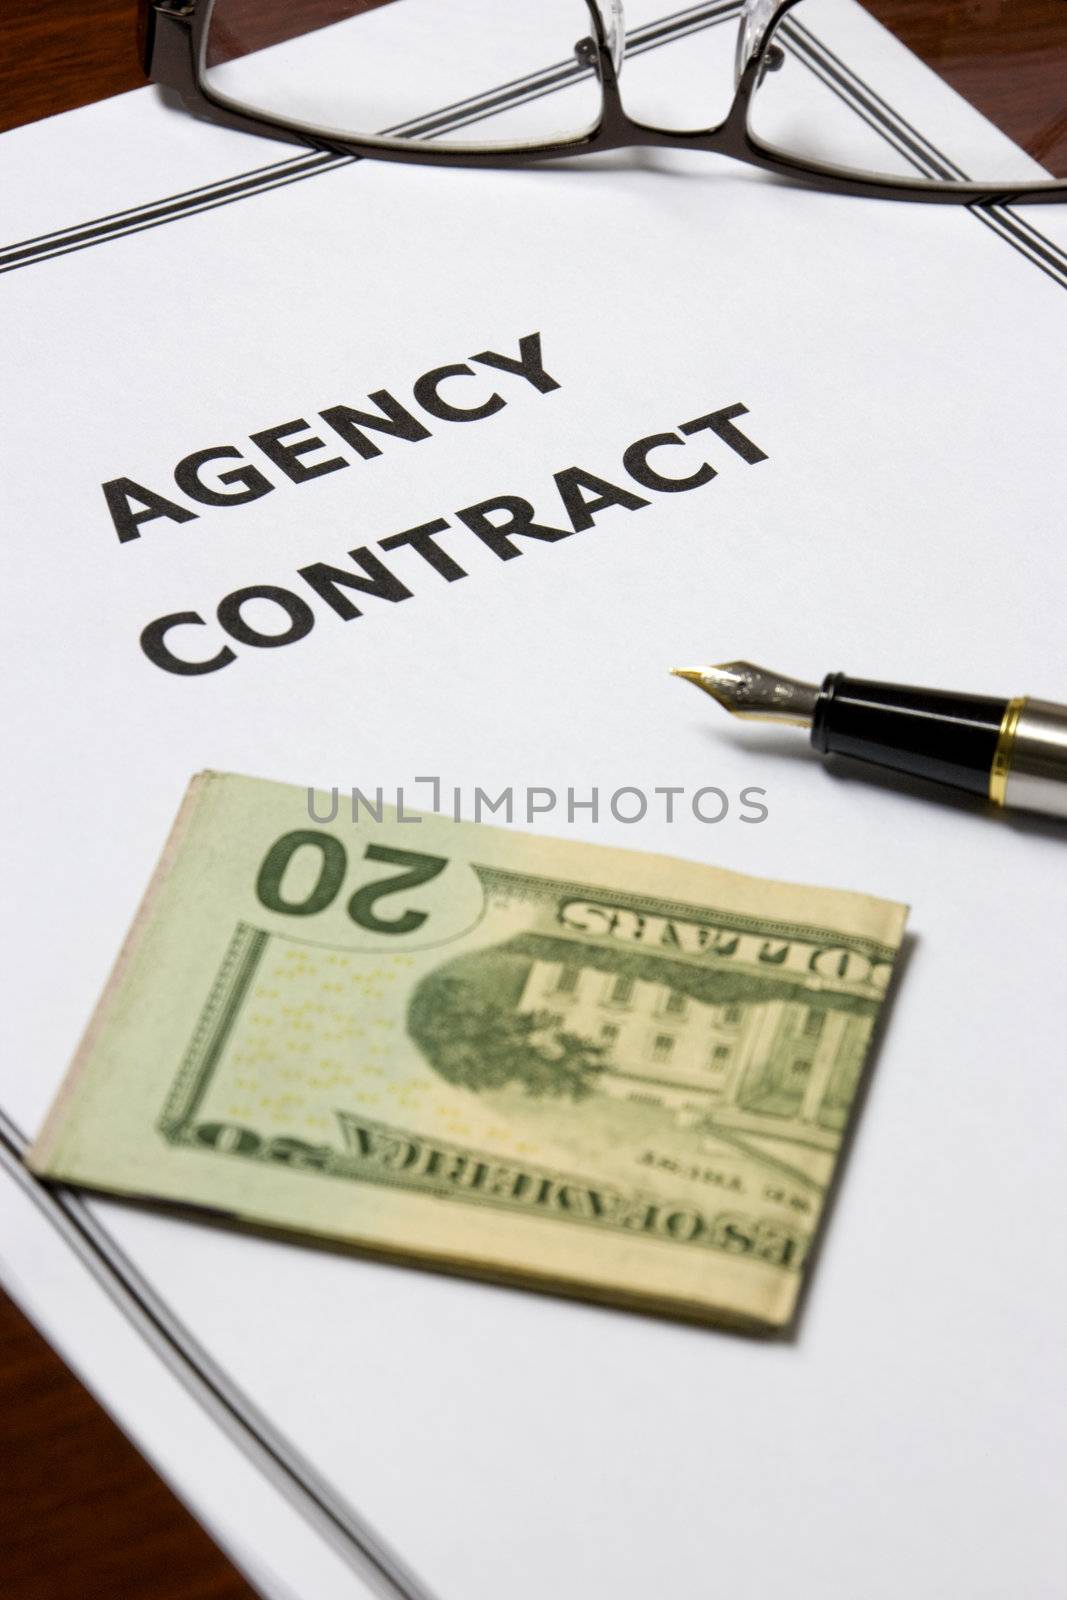 Image of an agency contract on an office table.